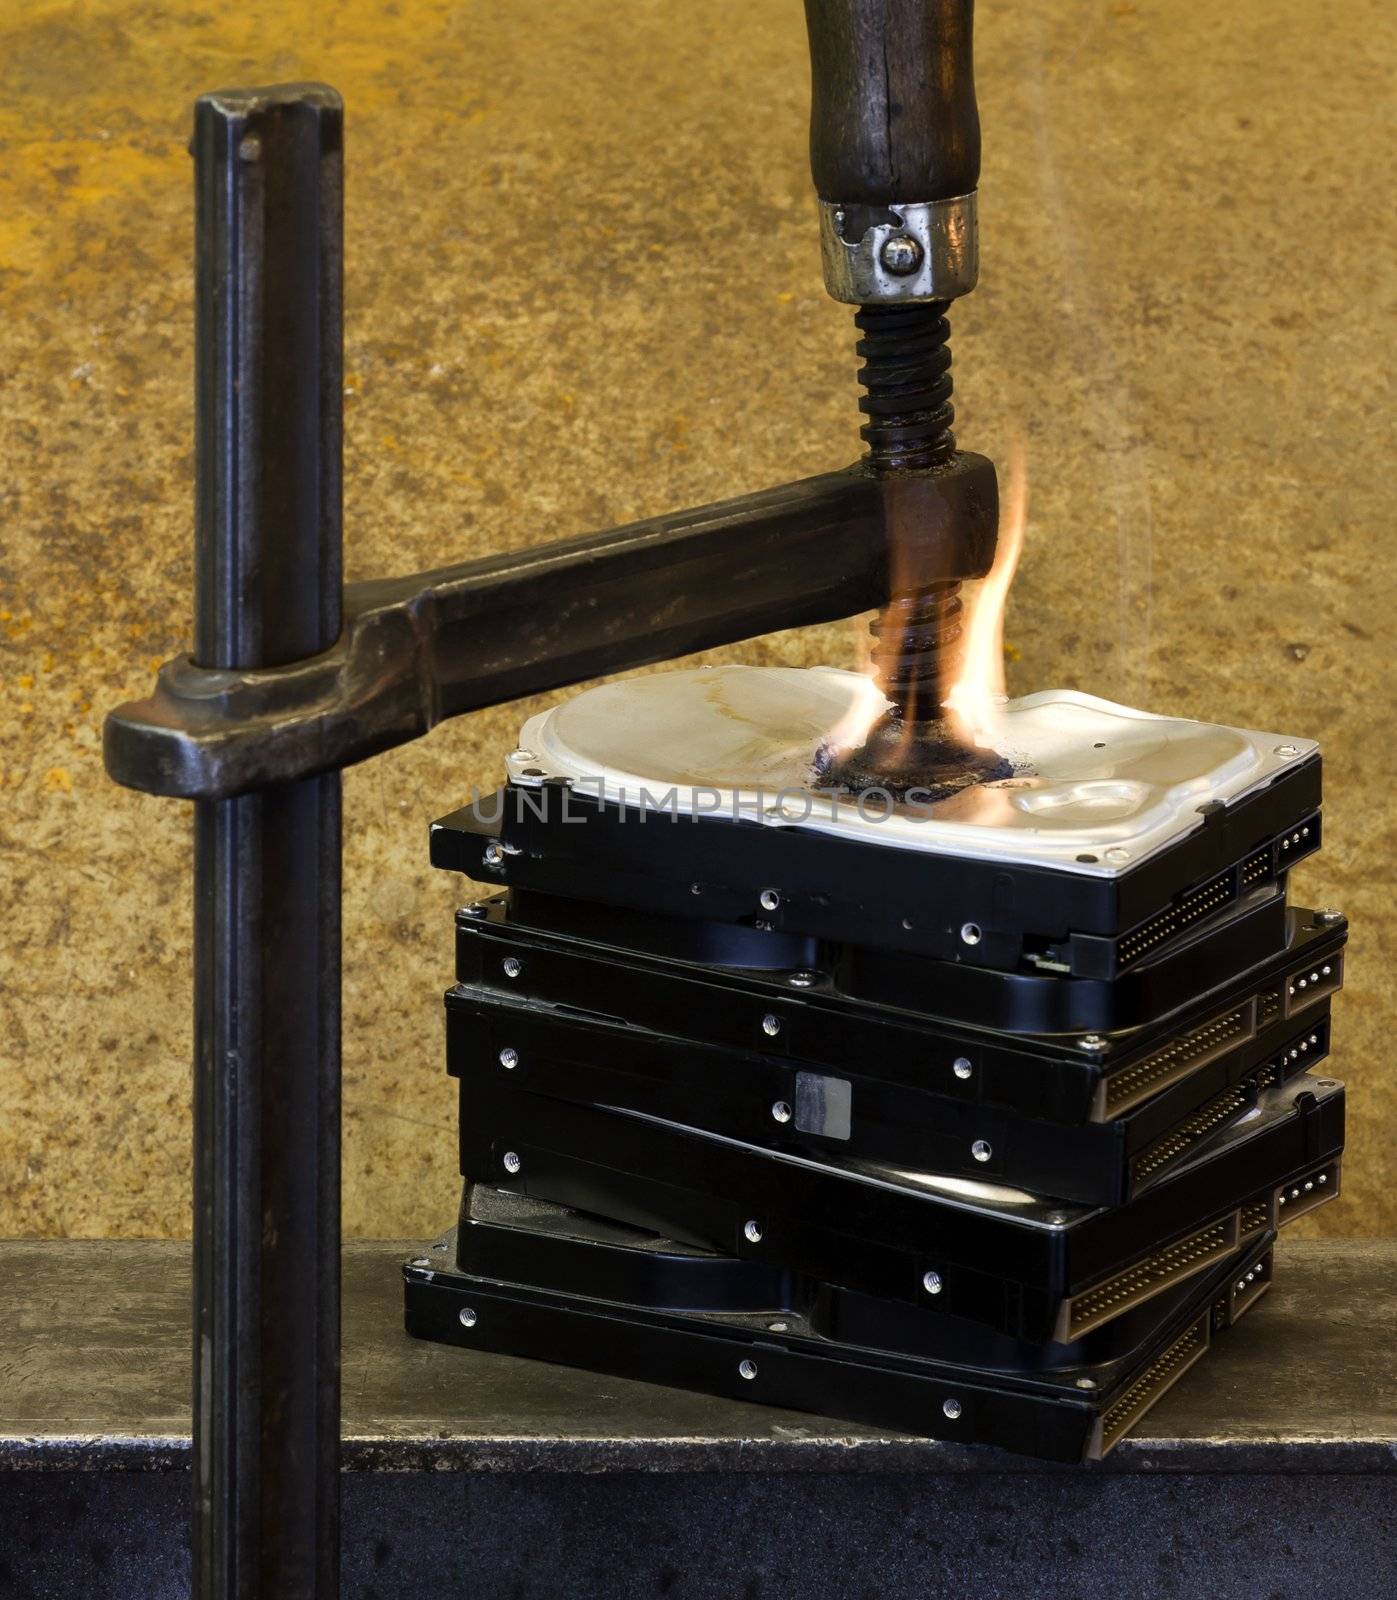 pressed hard drives with clamp and fire by gewoldi